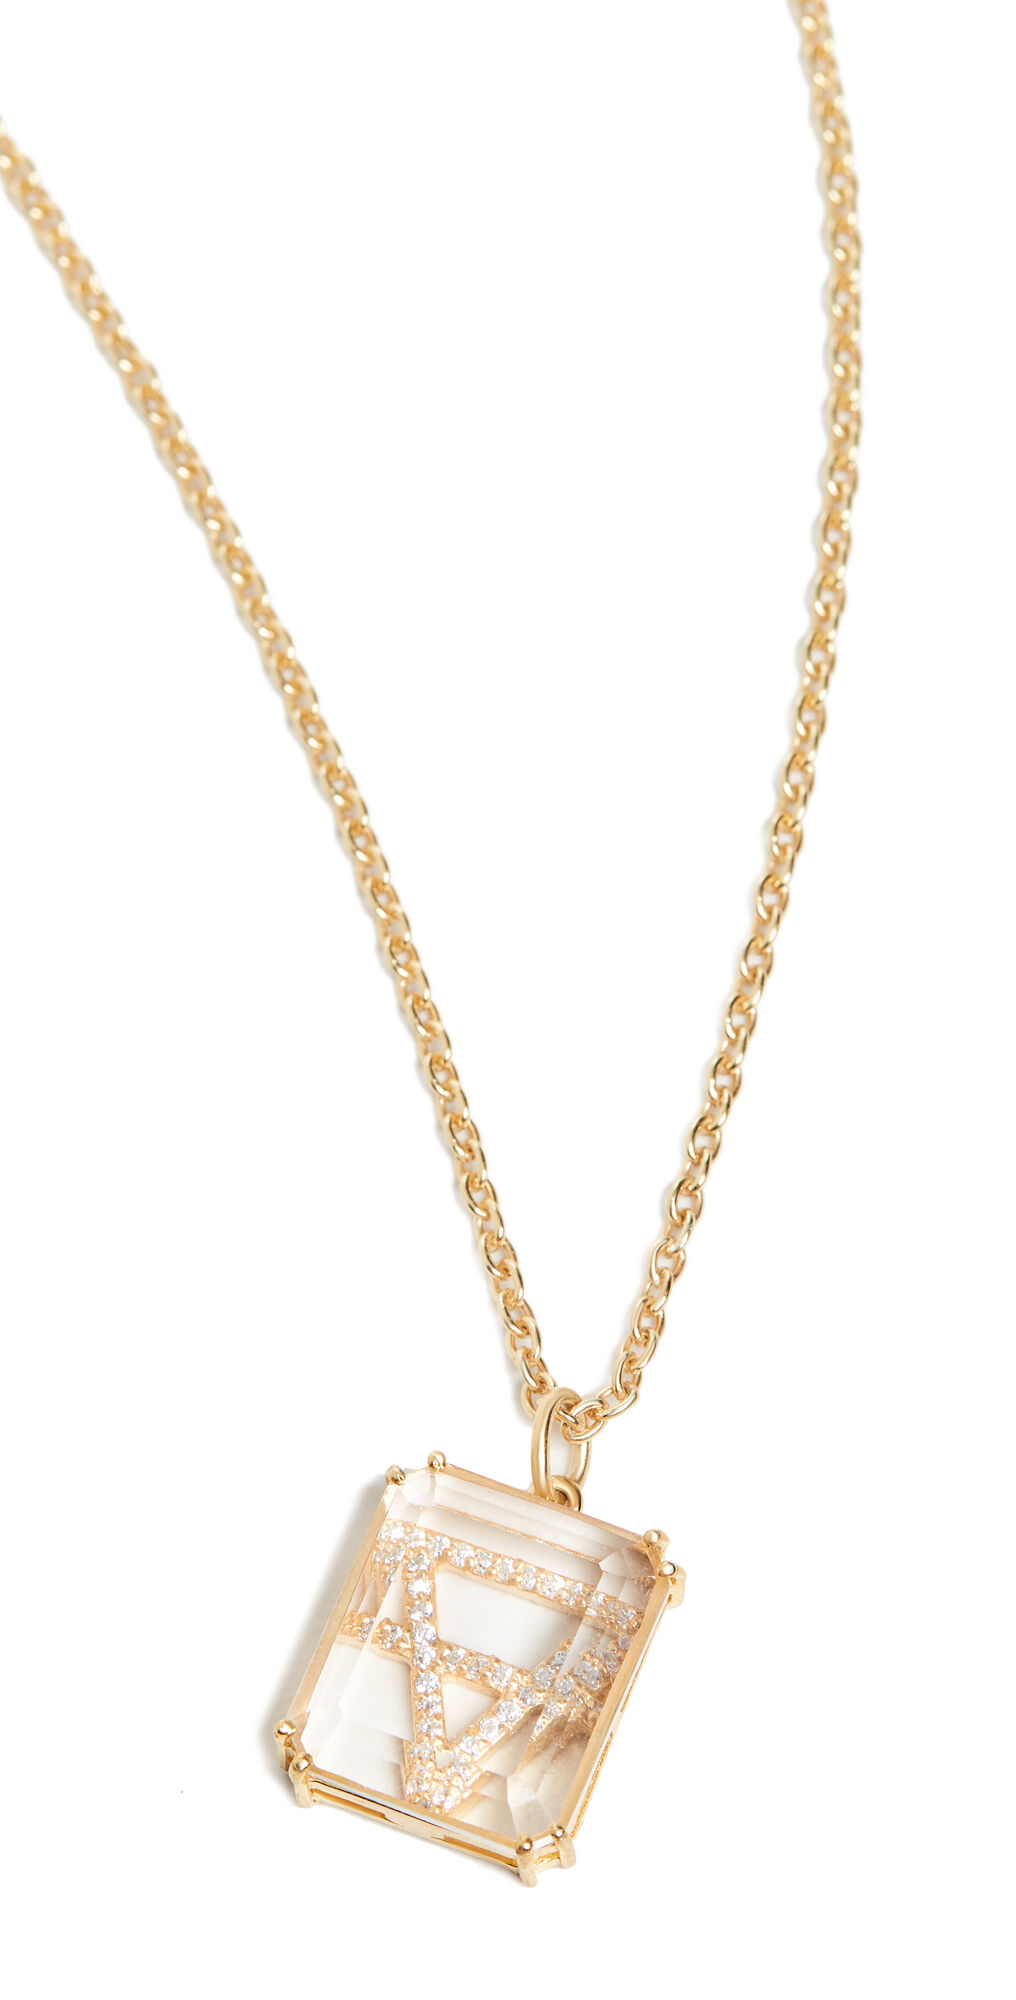 Maison Irem Earth Necklace Gold One Size  Gold  size:One Size